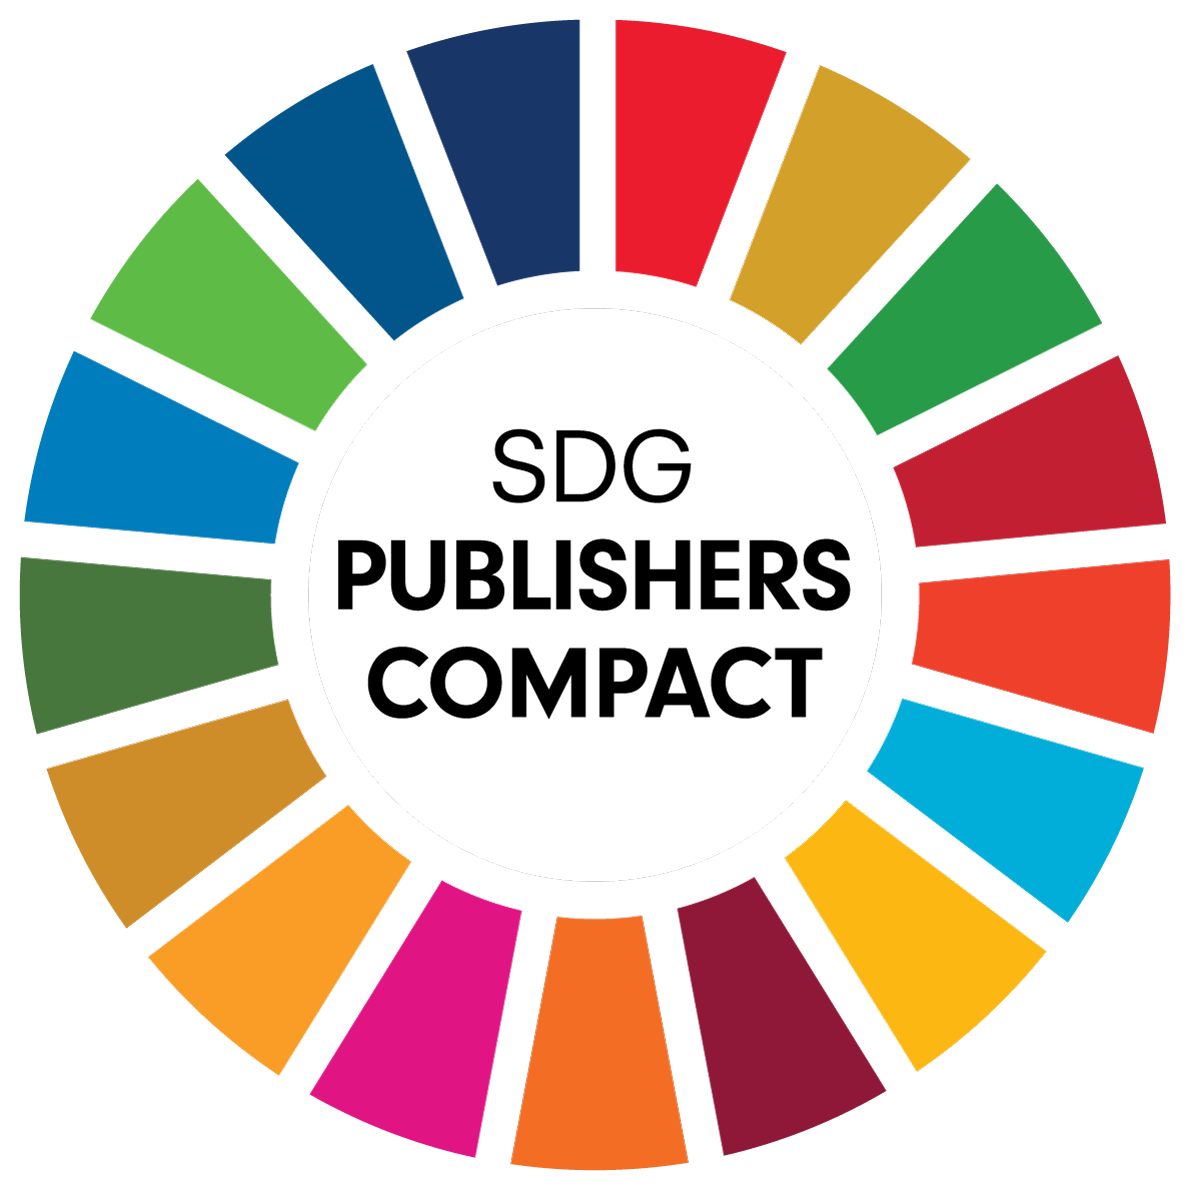 Color wheel around text reading "SDG Publishers Compact"